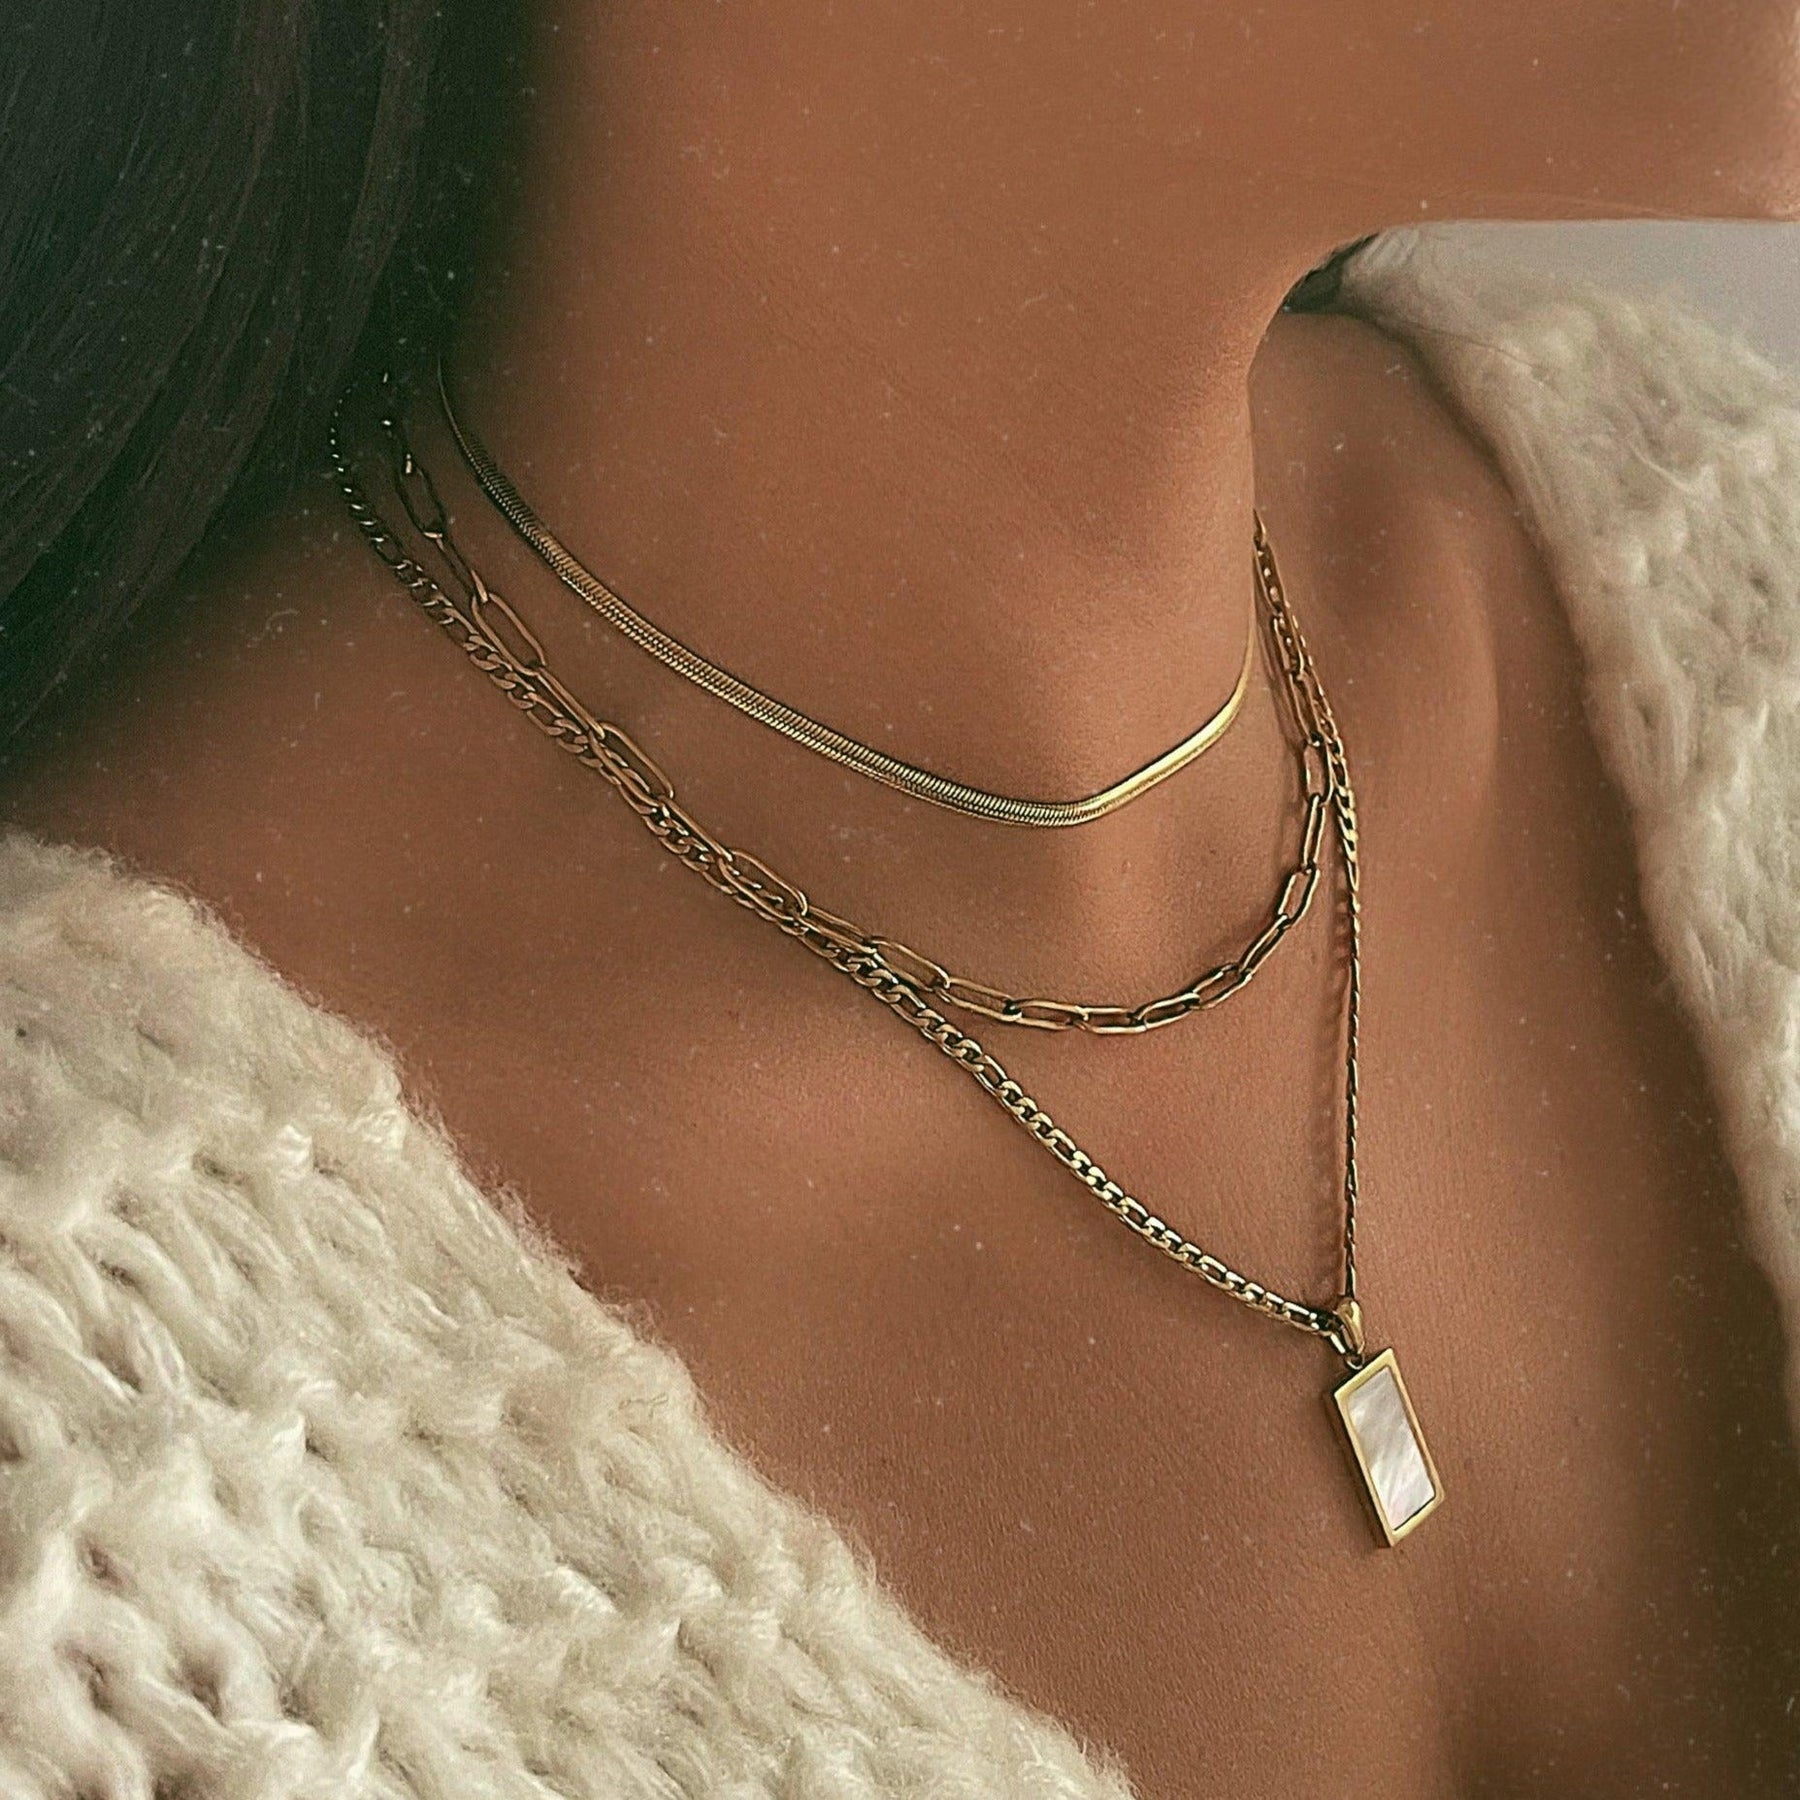 BohoMoon Stainless Steel Mollie Choker / Necklace